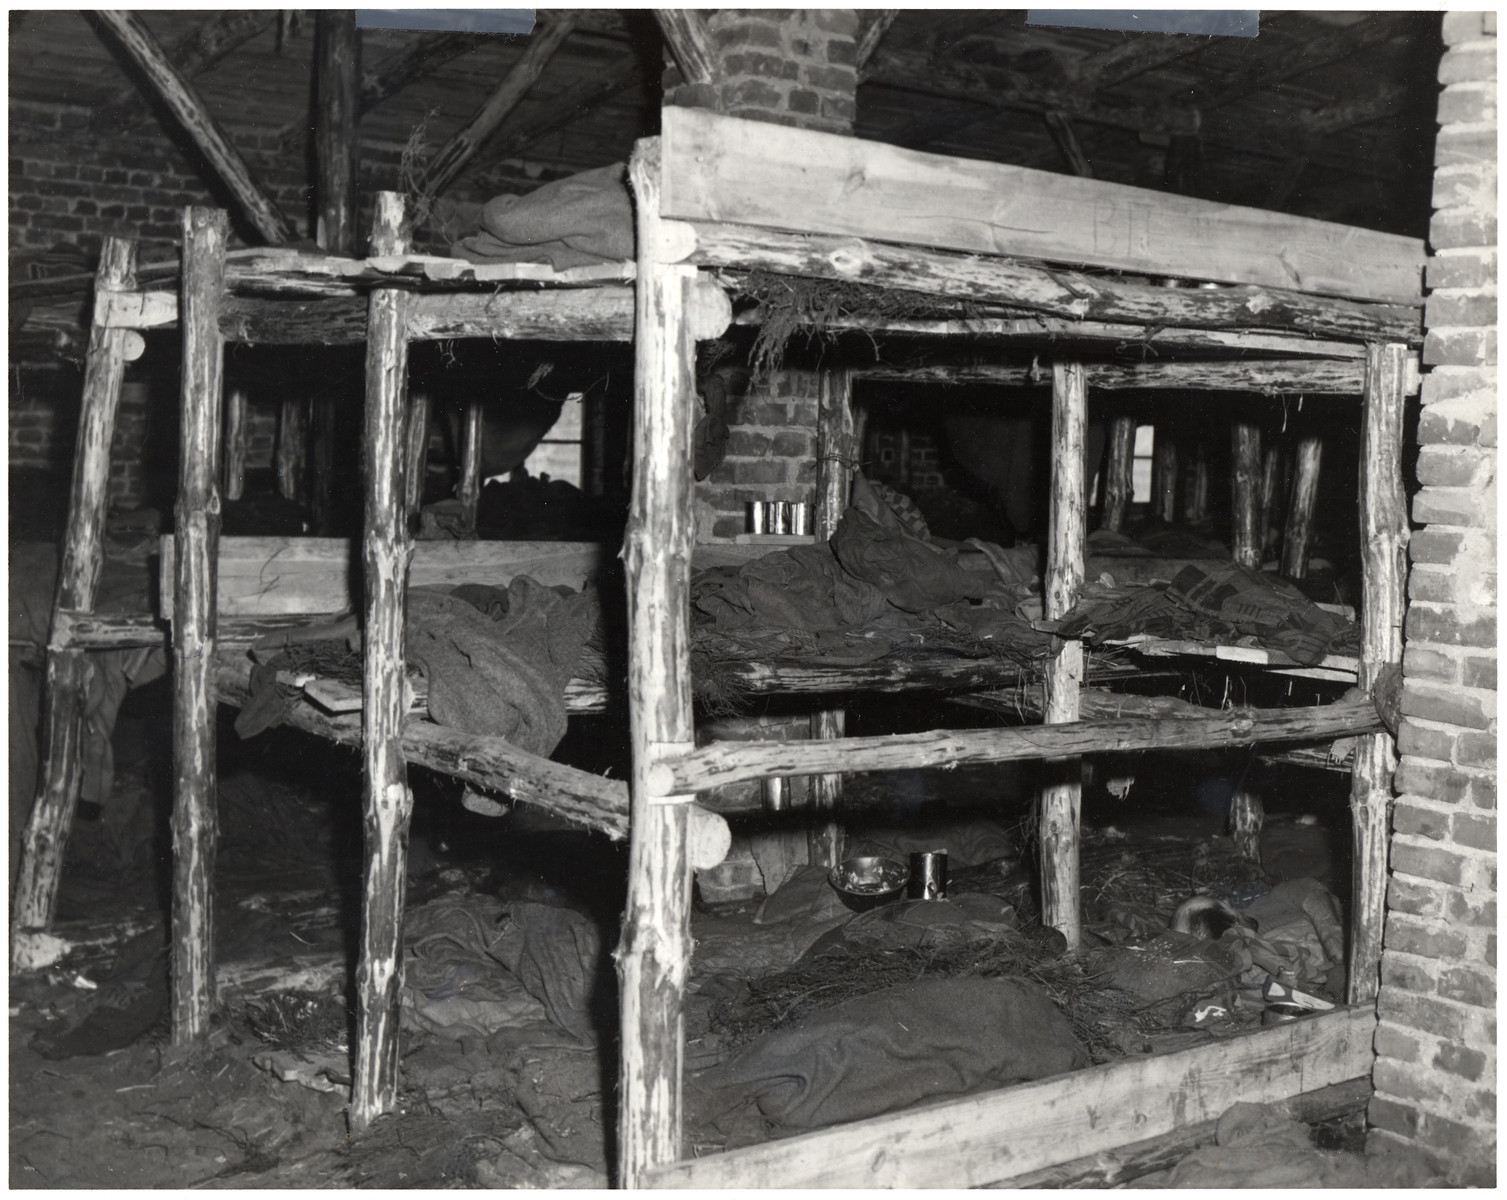 View of prisoners' bunks in a barracks in the Woebbelin concentration camp.